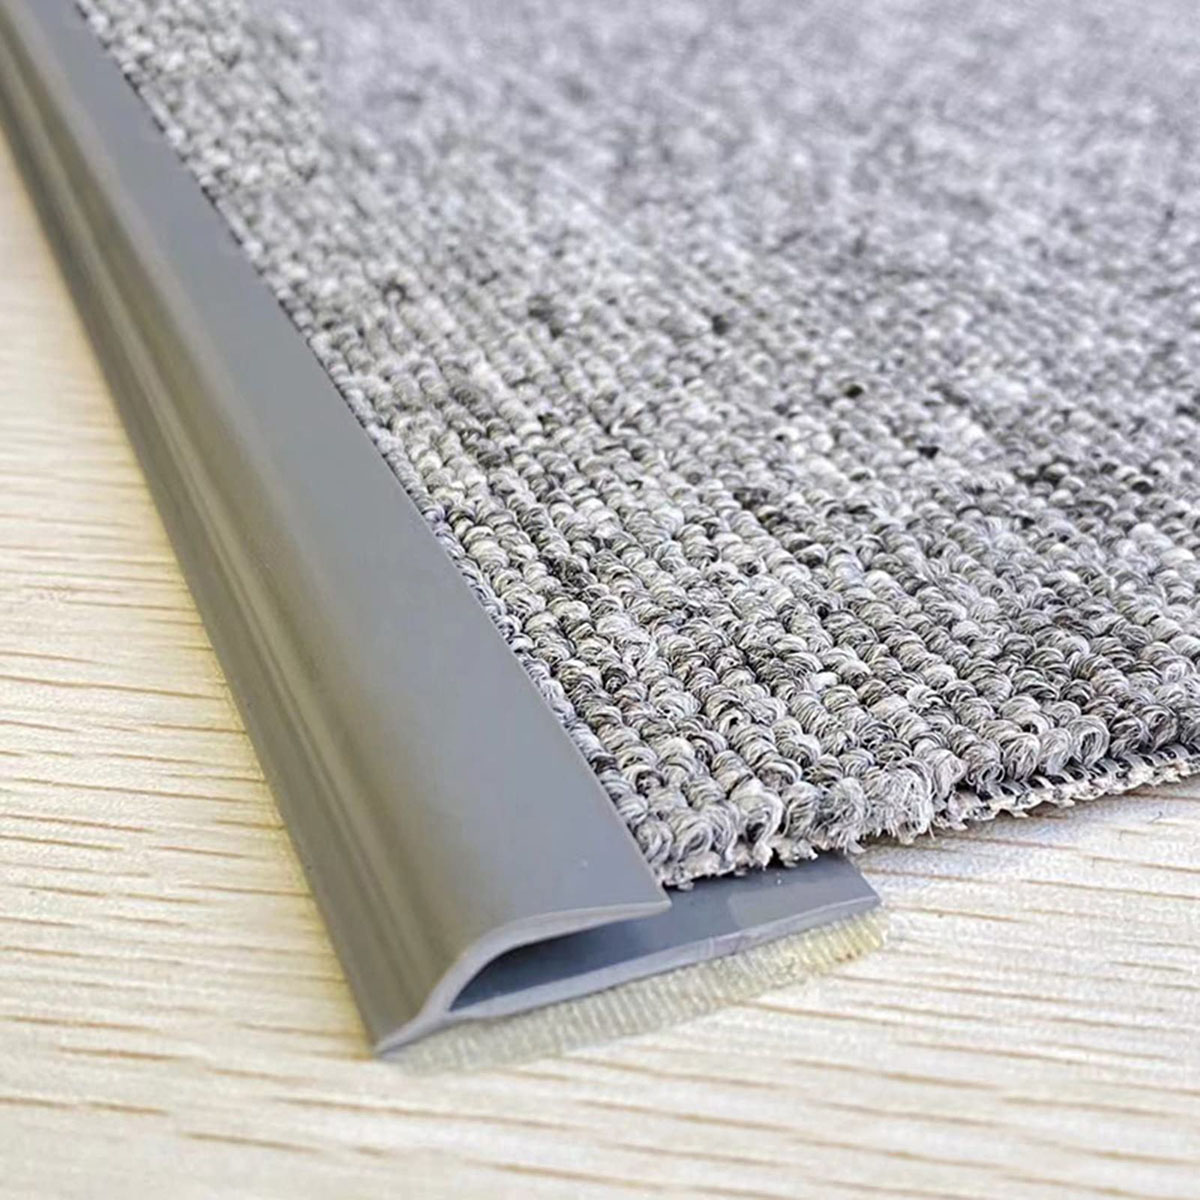 How To Keep Carpet Edges From Fraying